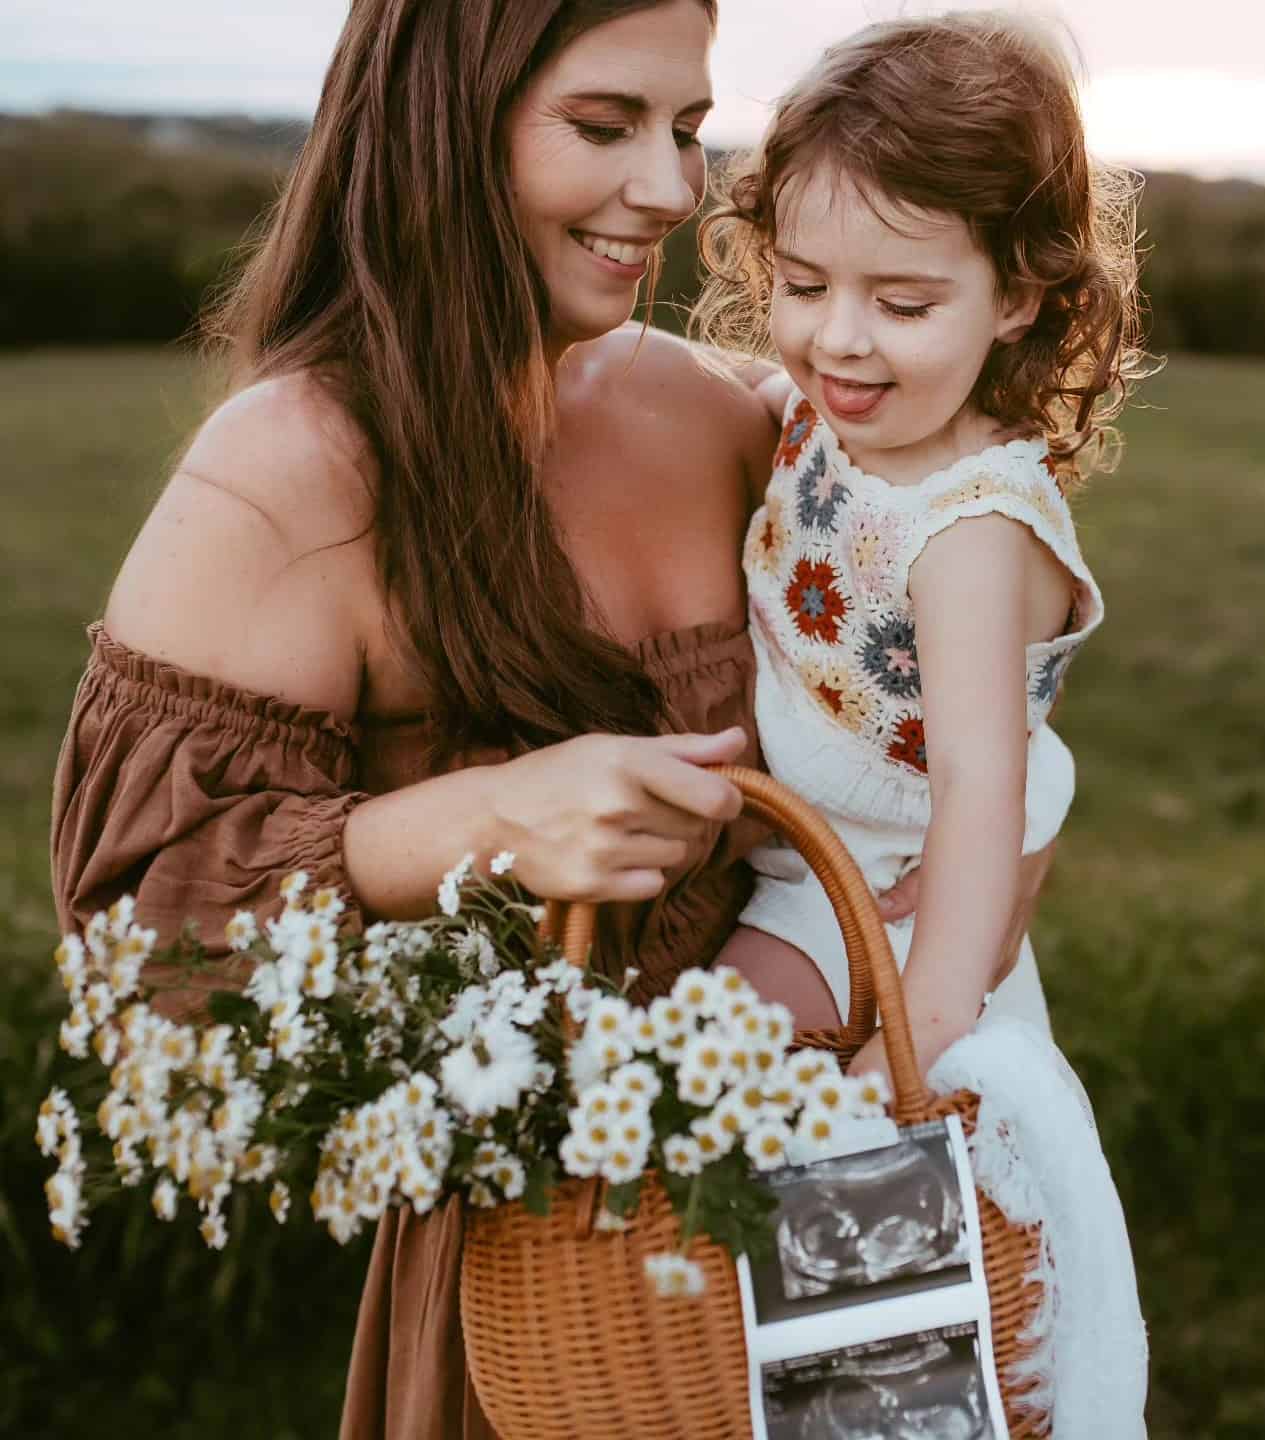 A mother and daughter during a spring family photoshoot with a basket of flowers with ultrasound photos